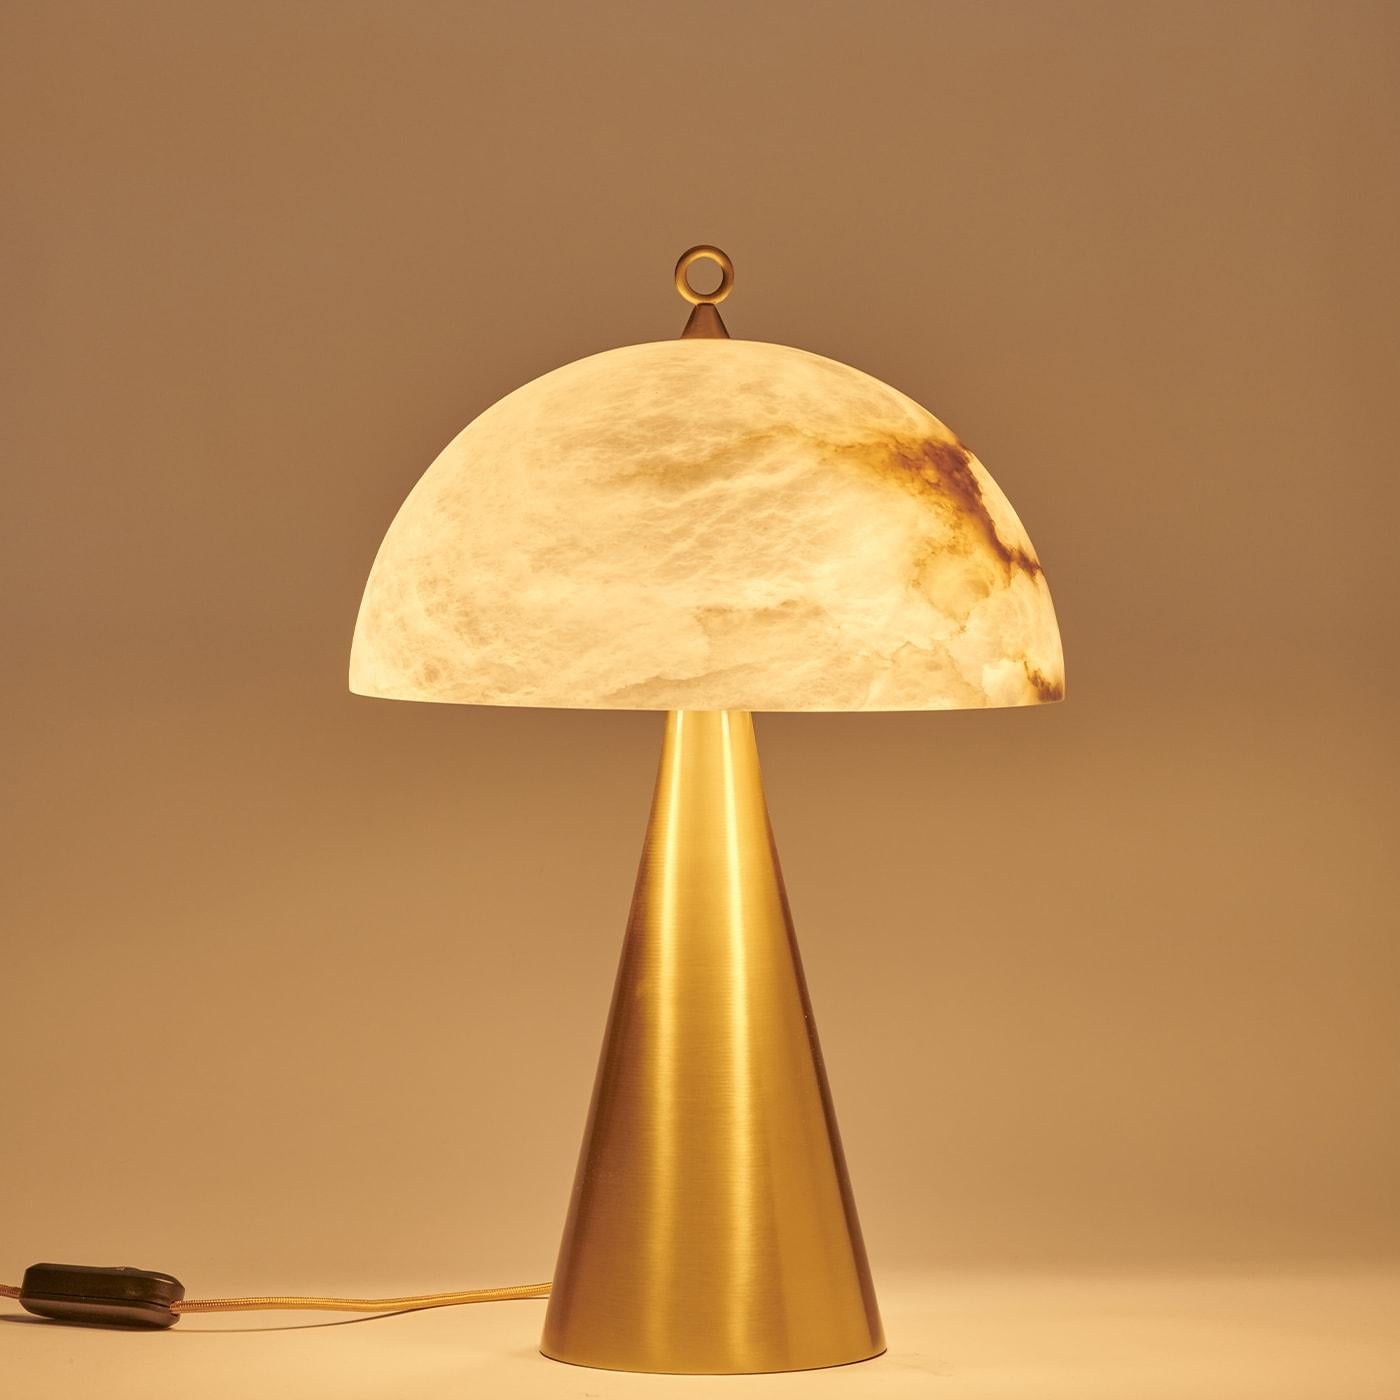 Born from the success of our Funghetto model, the Fungotto table lamp has larger and bolder dimensions, while maintaining the simplicity of its shapes. The semi-spherical alabaster lampshade, with its veins emphasized by the light, is completed by